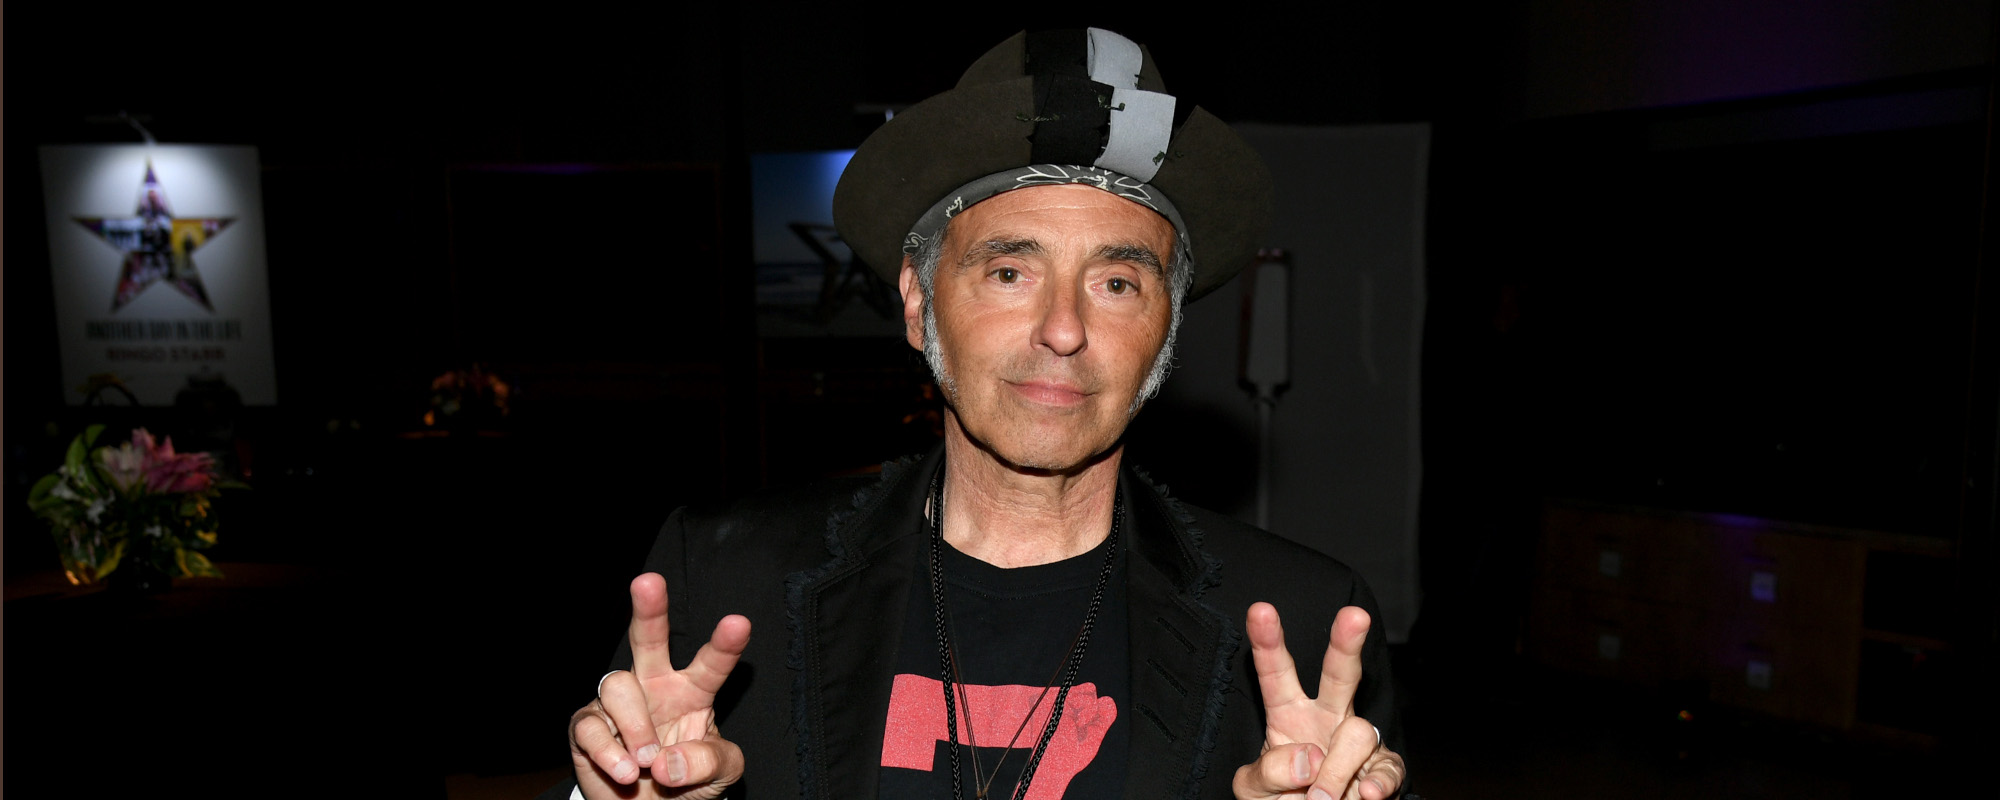 Bruce Springsteen Guitarist, Nils Lofgren, Joins Neil Young, and Joni Mitchell in Removing Music from Spotify